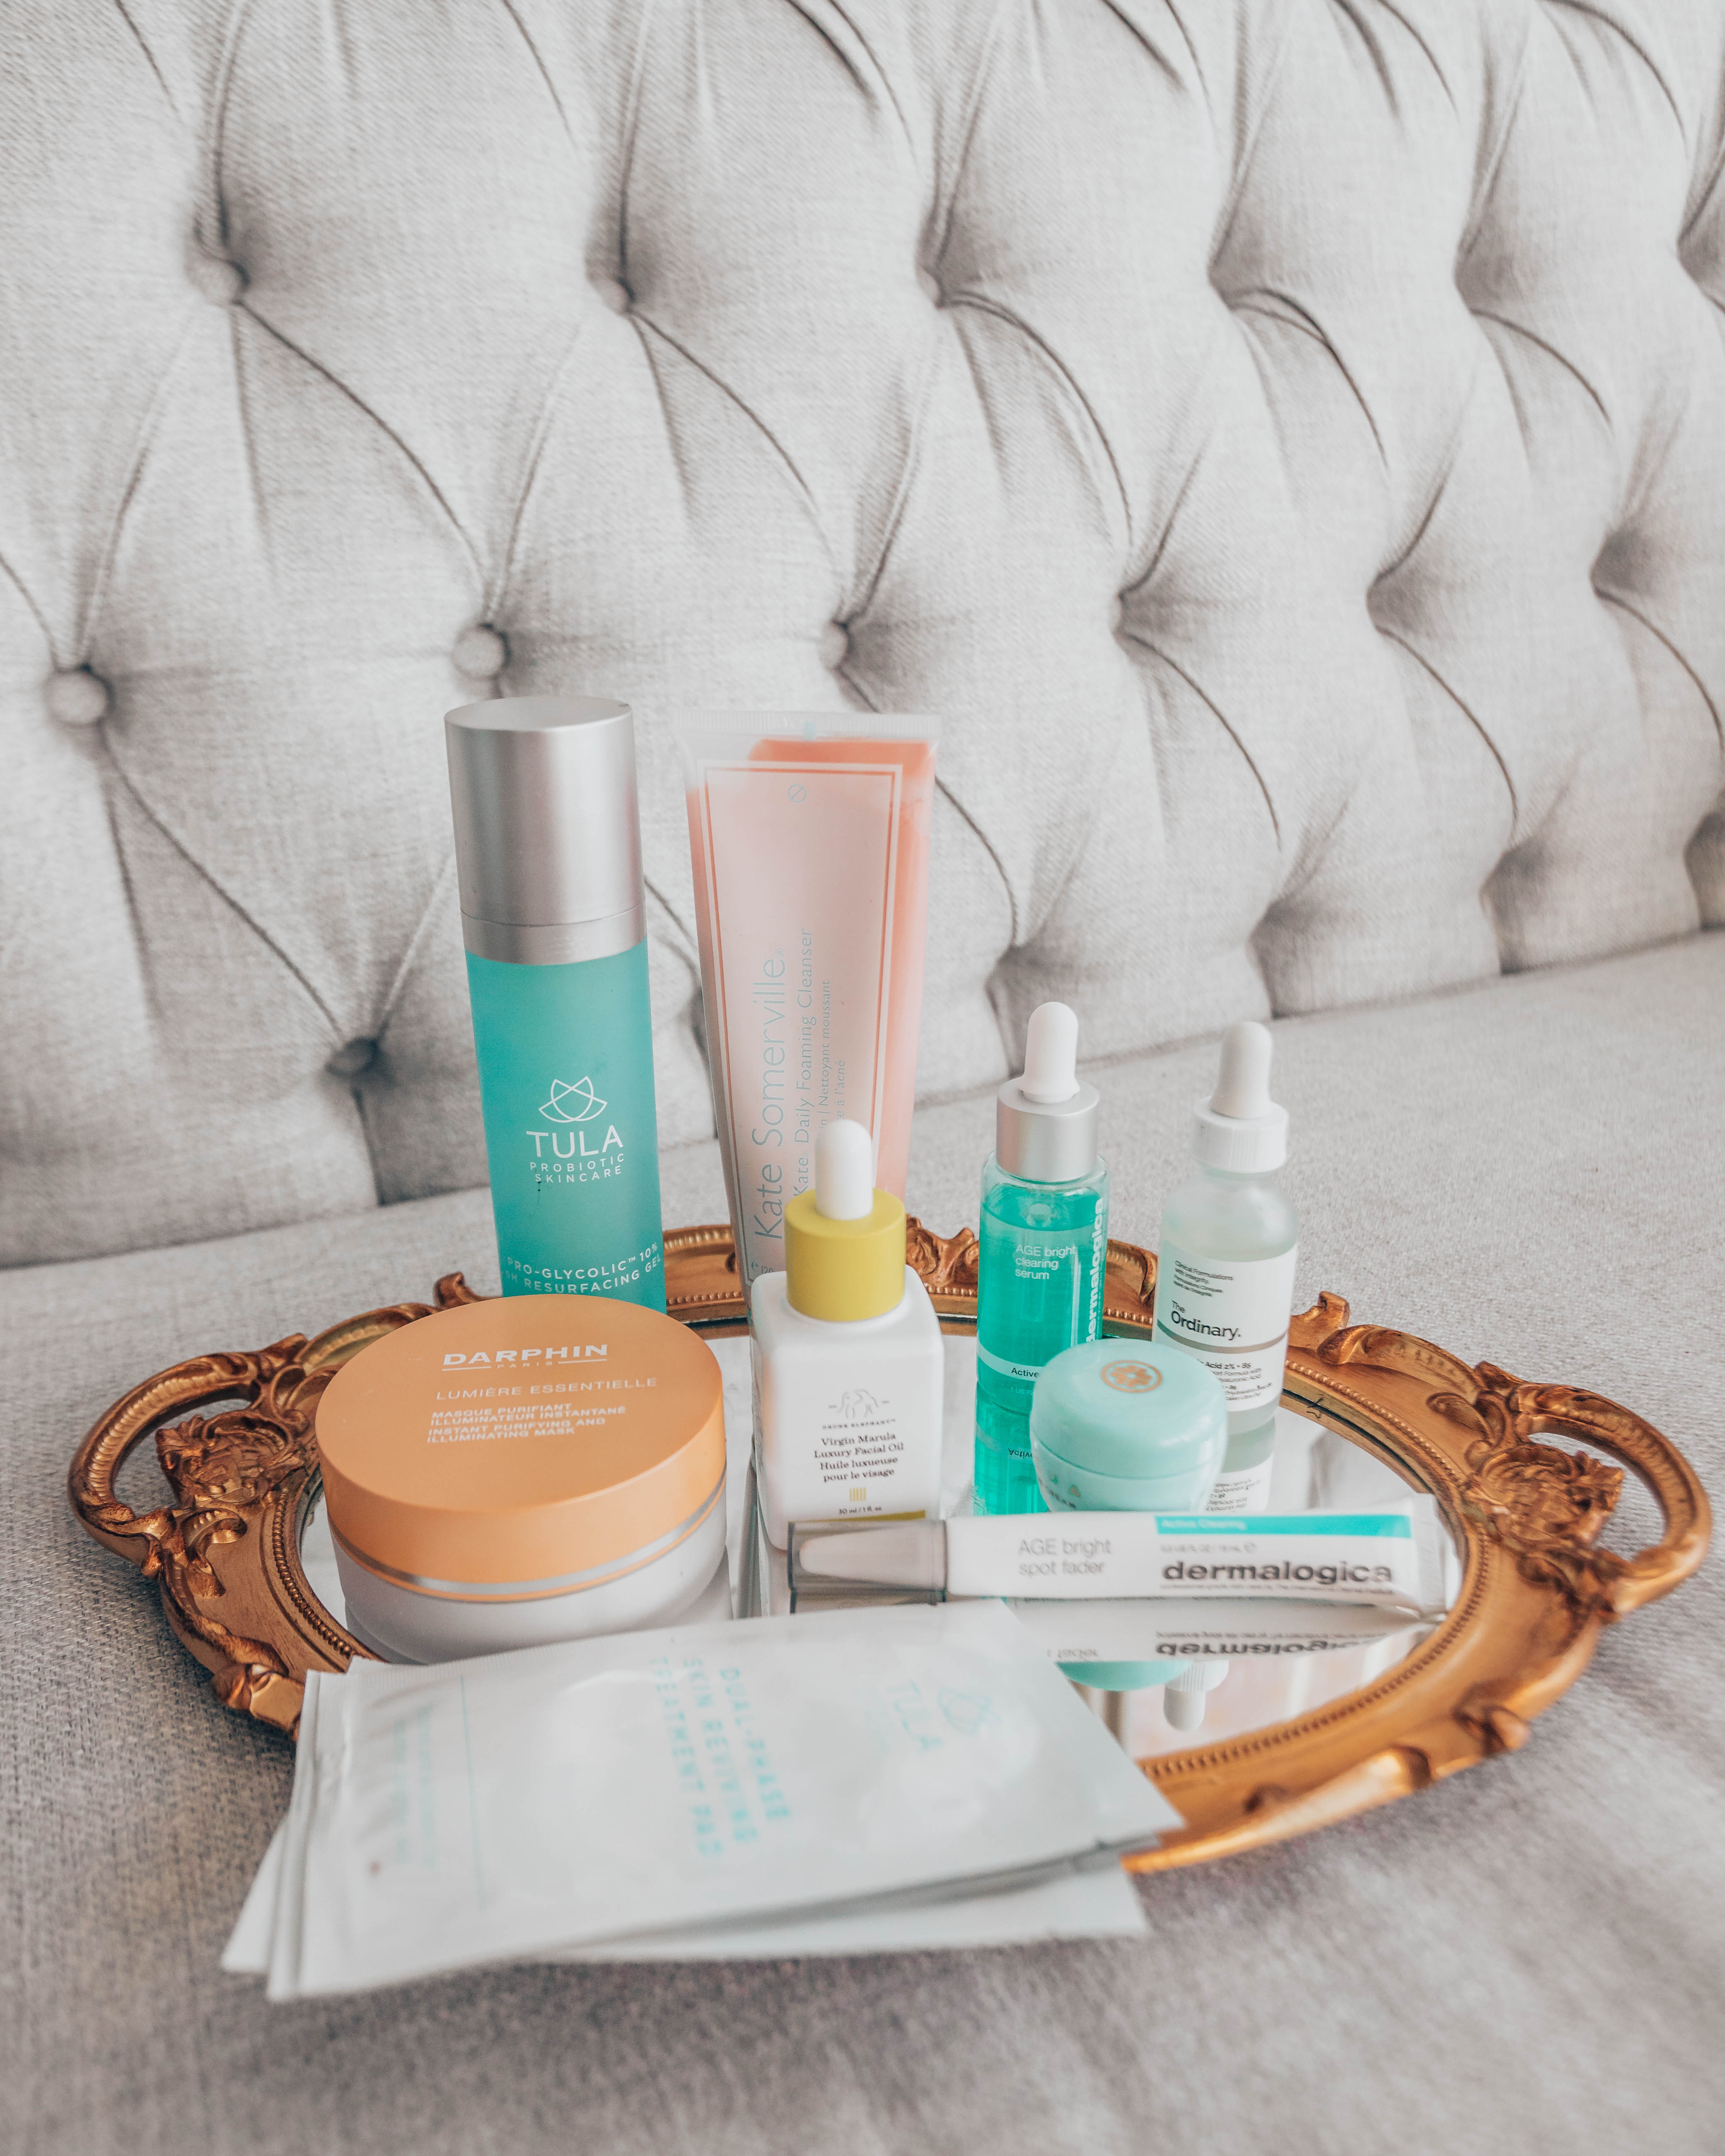 MY EVERYDAY MORNING SKINCARE ROUTINE